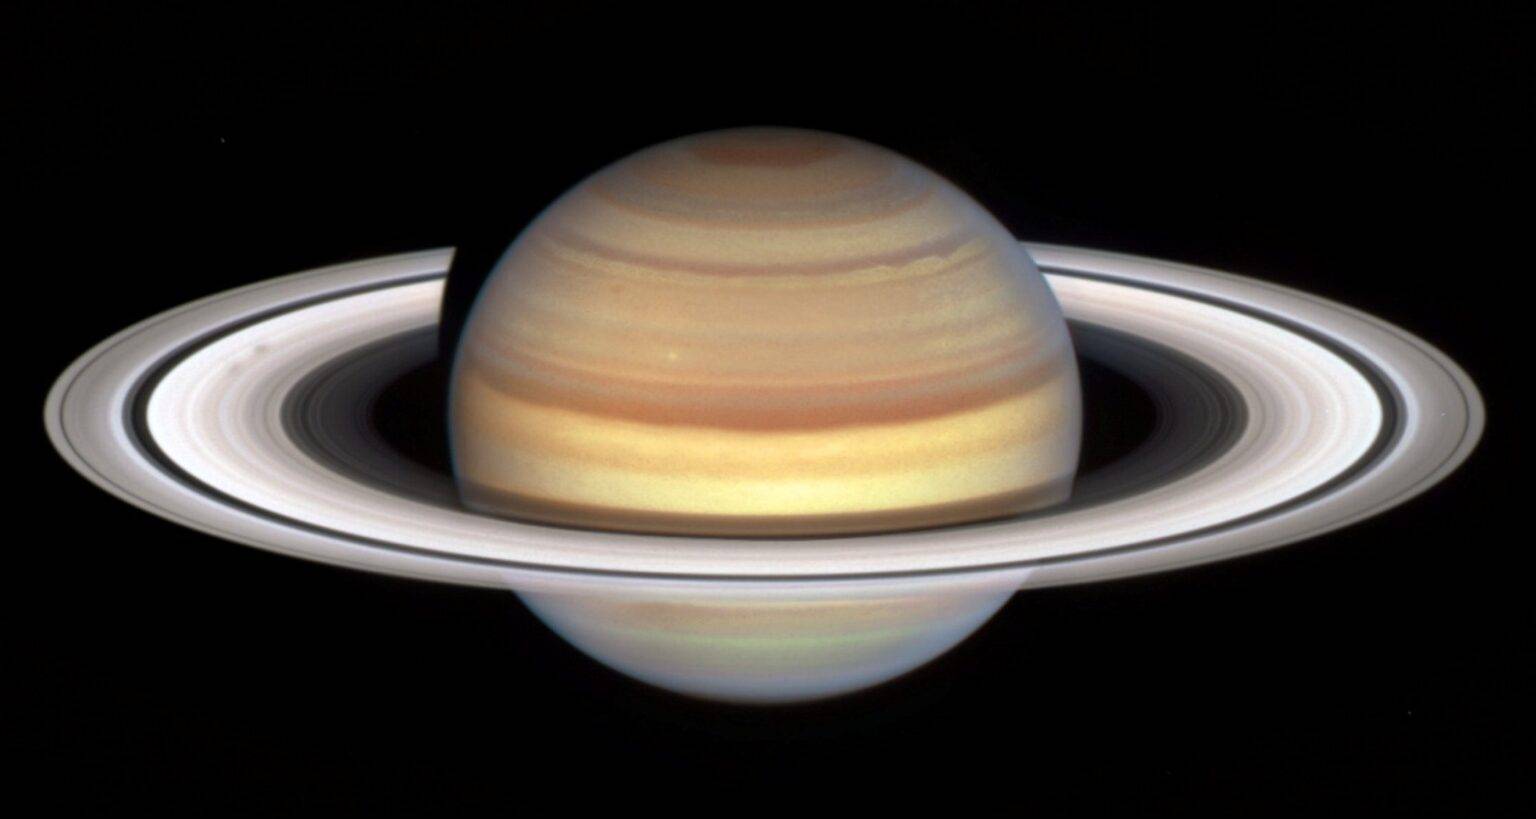 Scientists think Saturn’s rings are just babies in cosmic terms